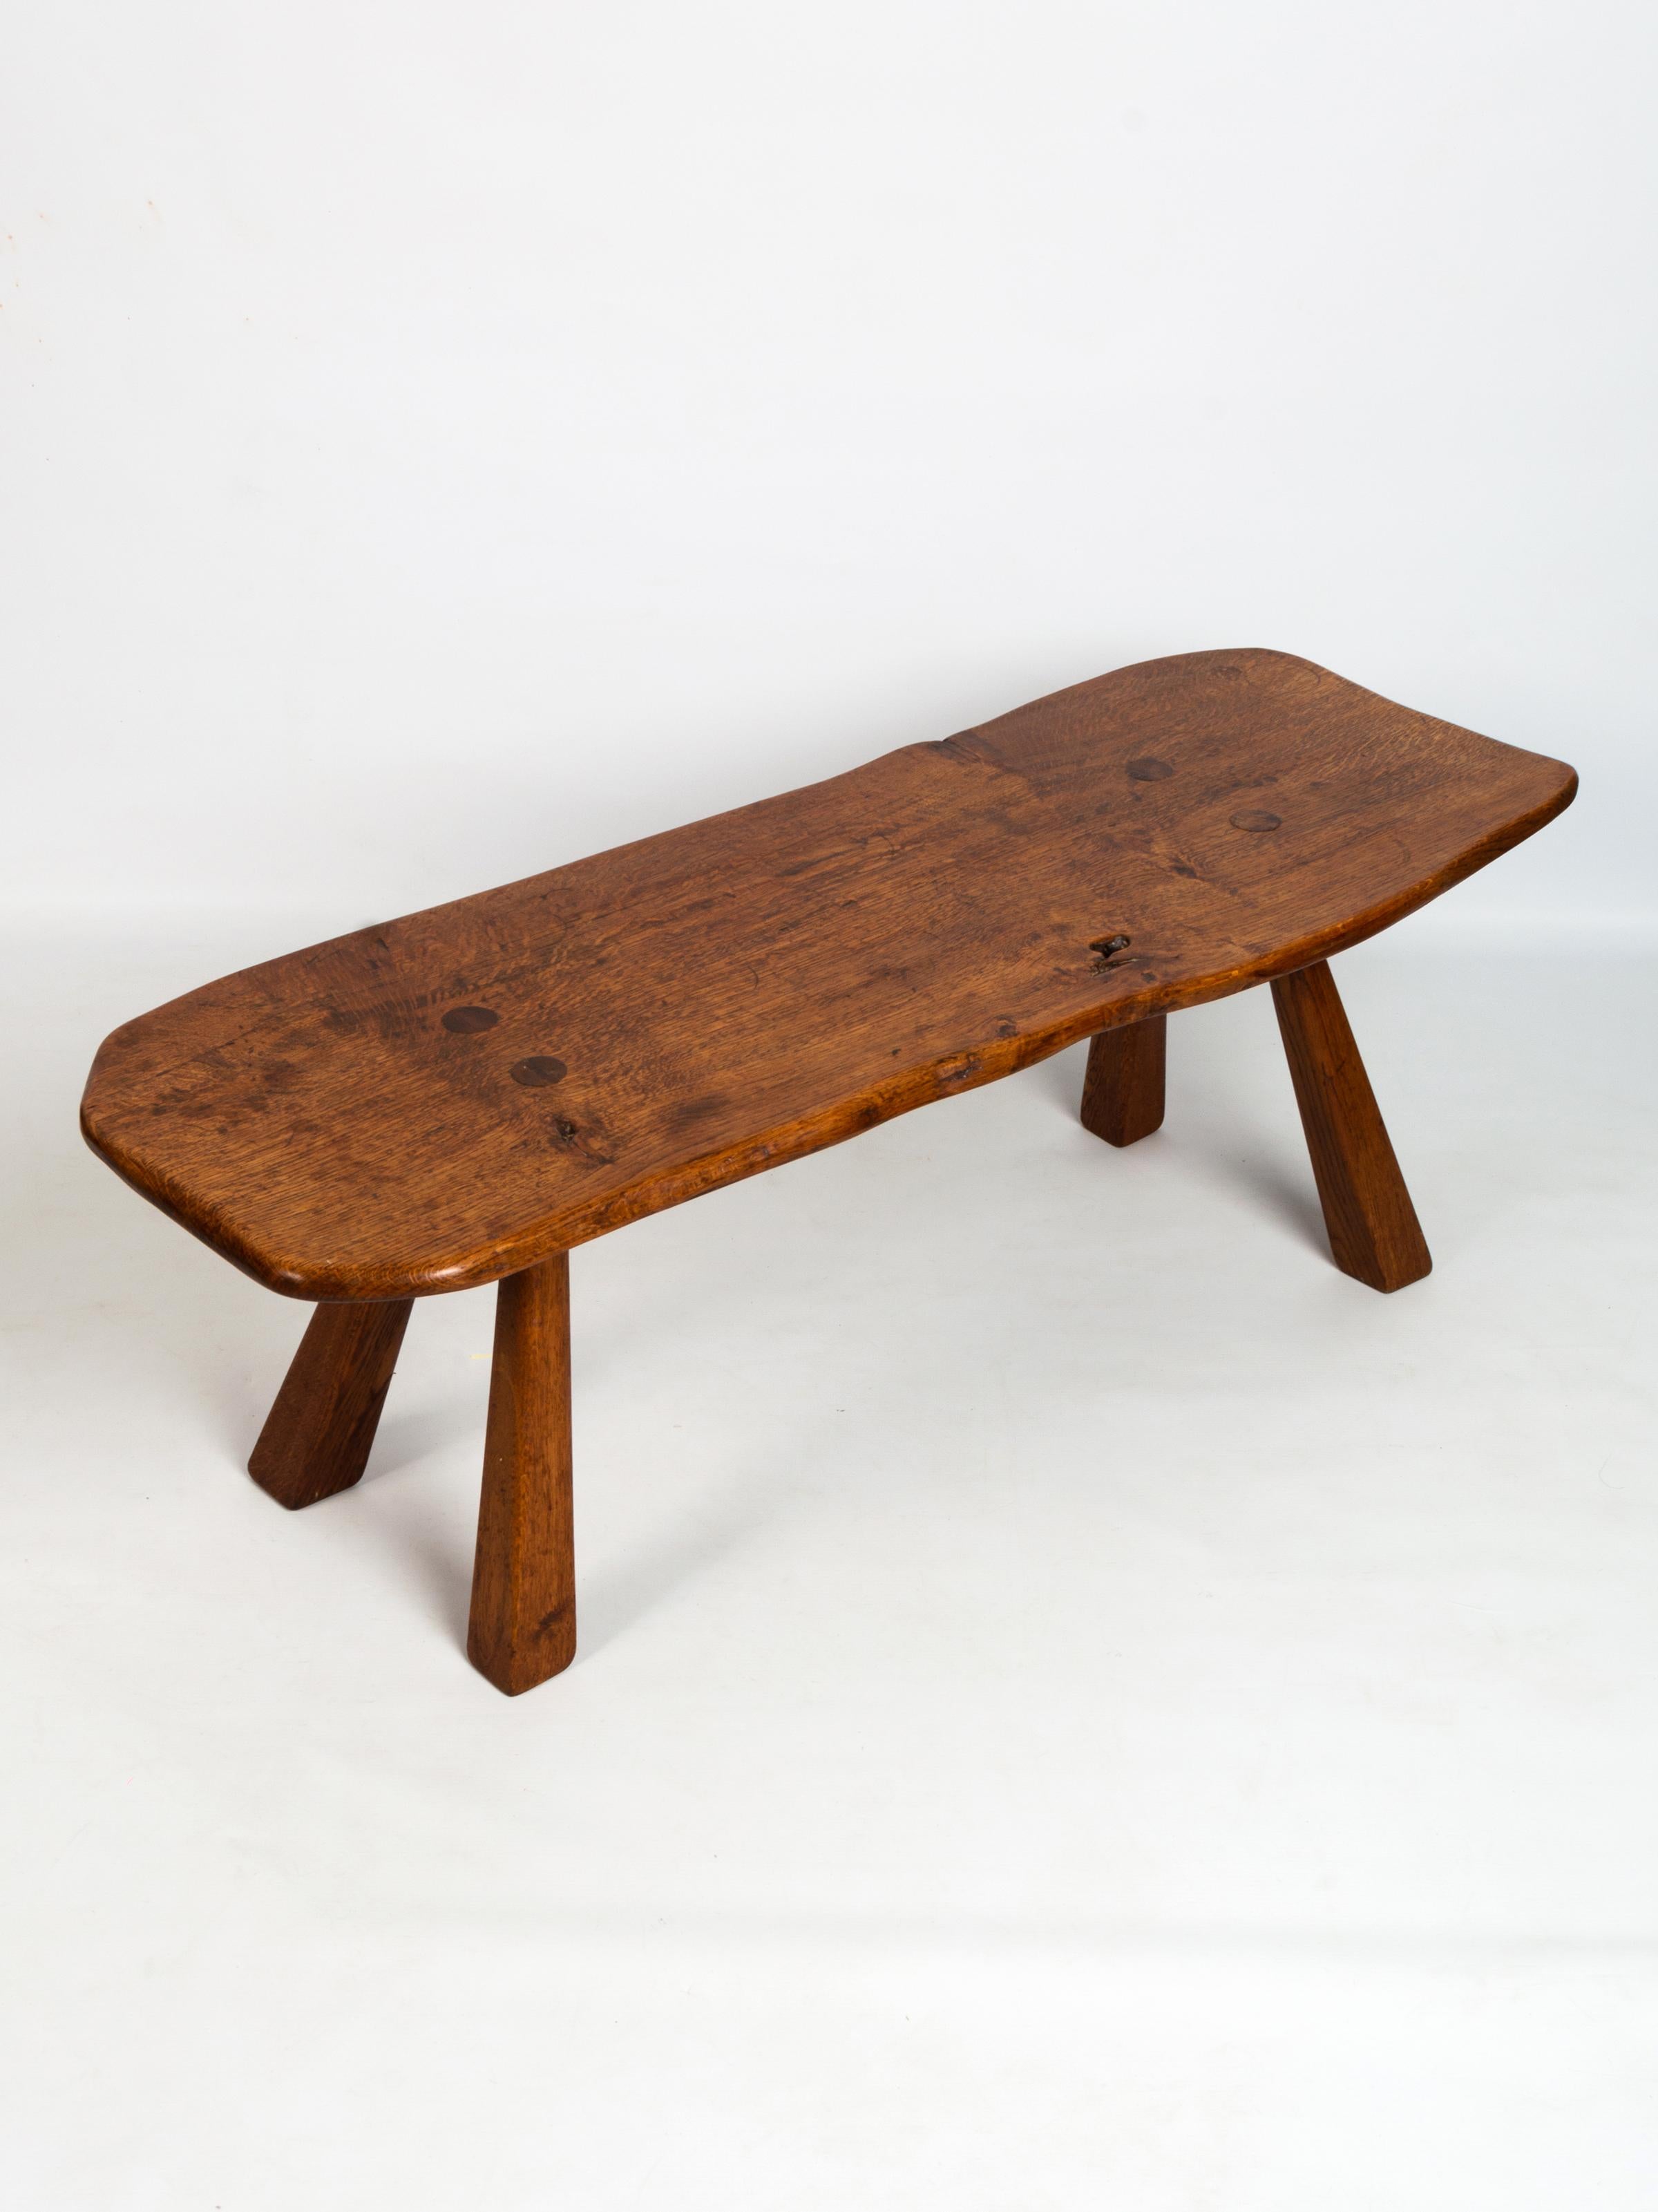  English Arts & Crafts Cotswolds School Oak Bench Coffee Table Console, C.1950 For Sale 4